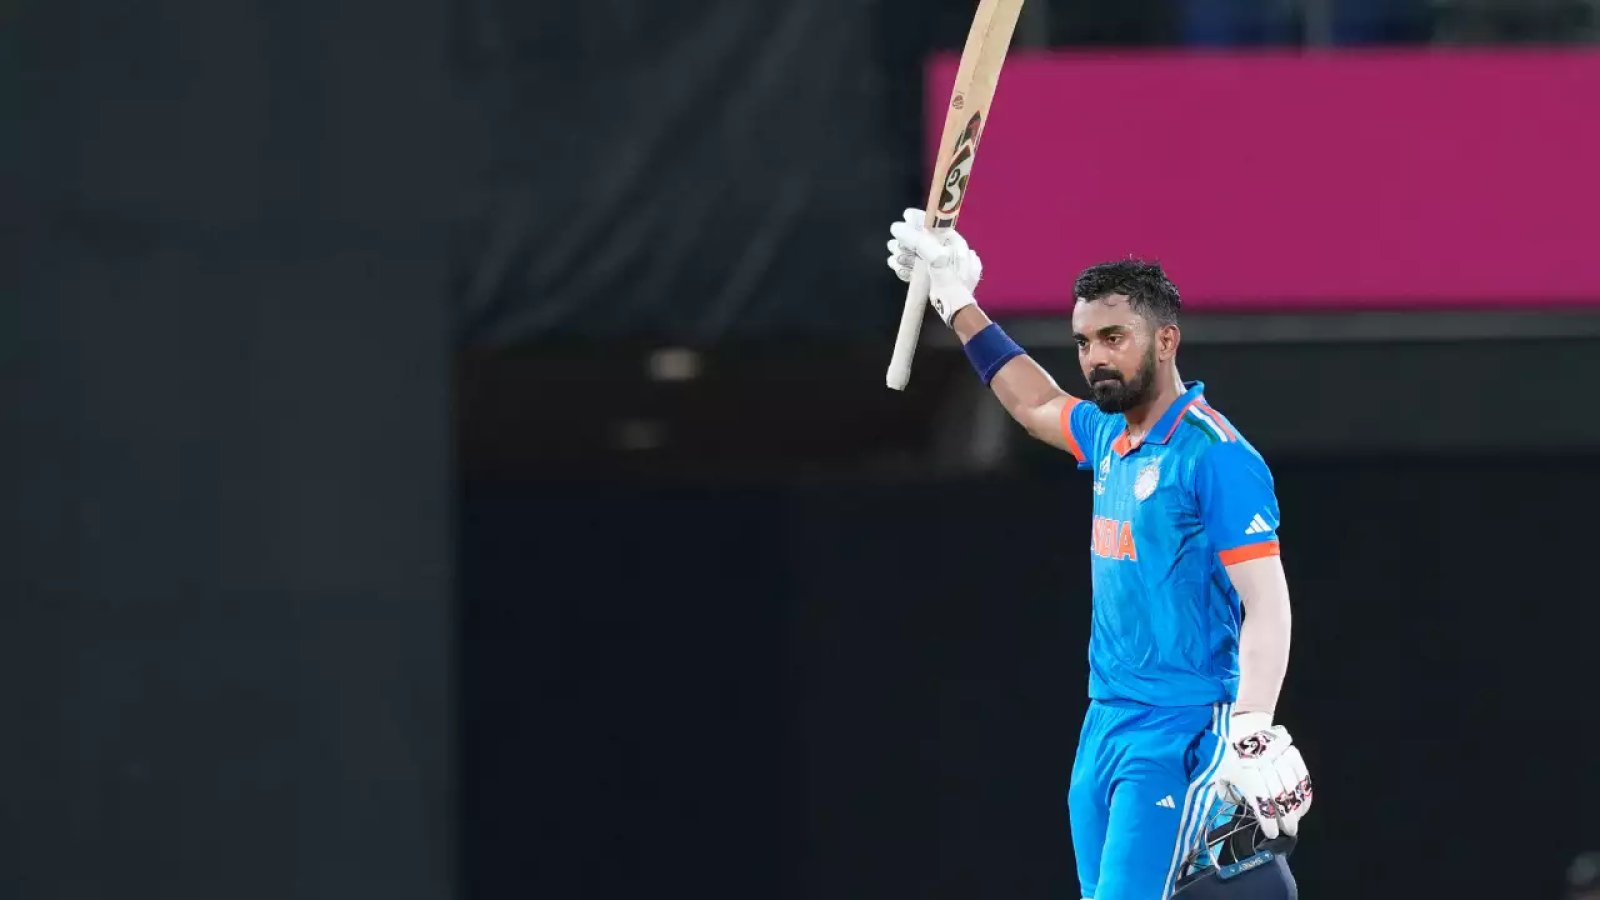 KL Rahul's pain after his record-breaking century in Sachurian gave a befitting reply to social media trolls